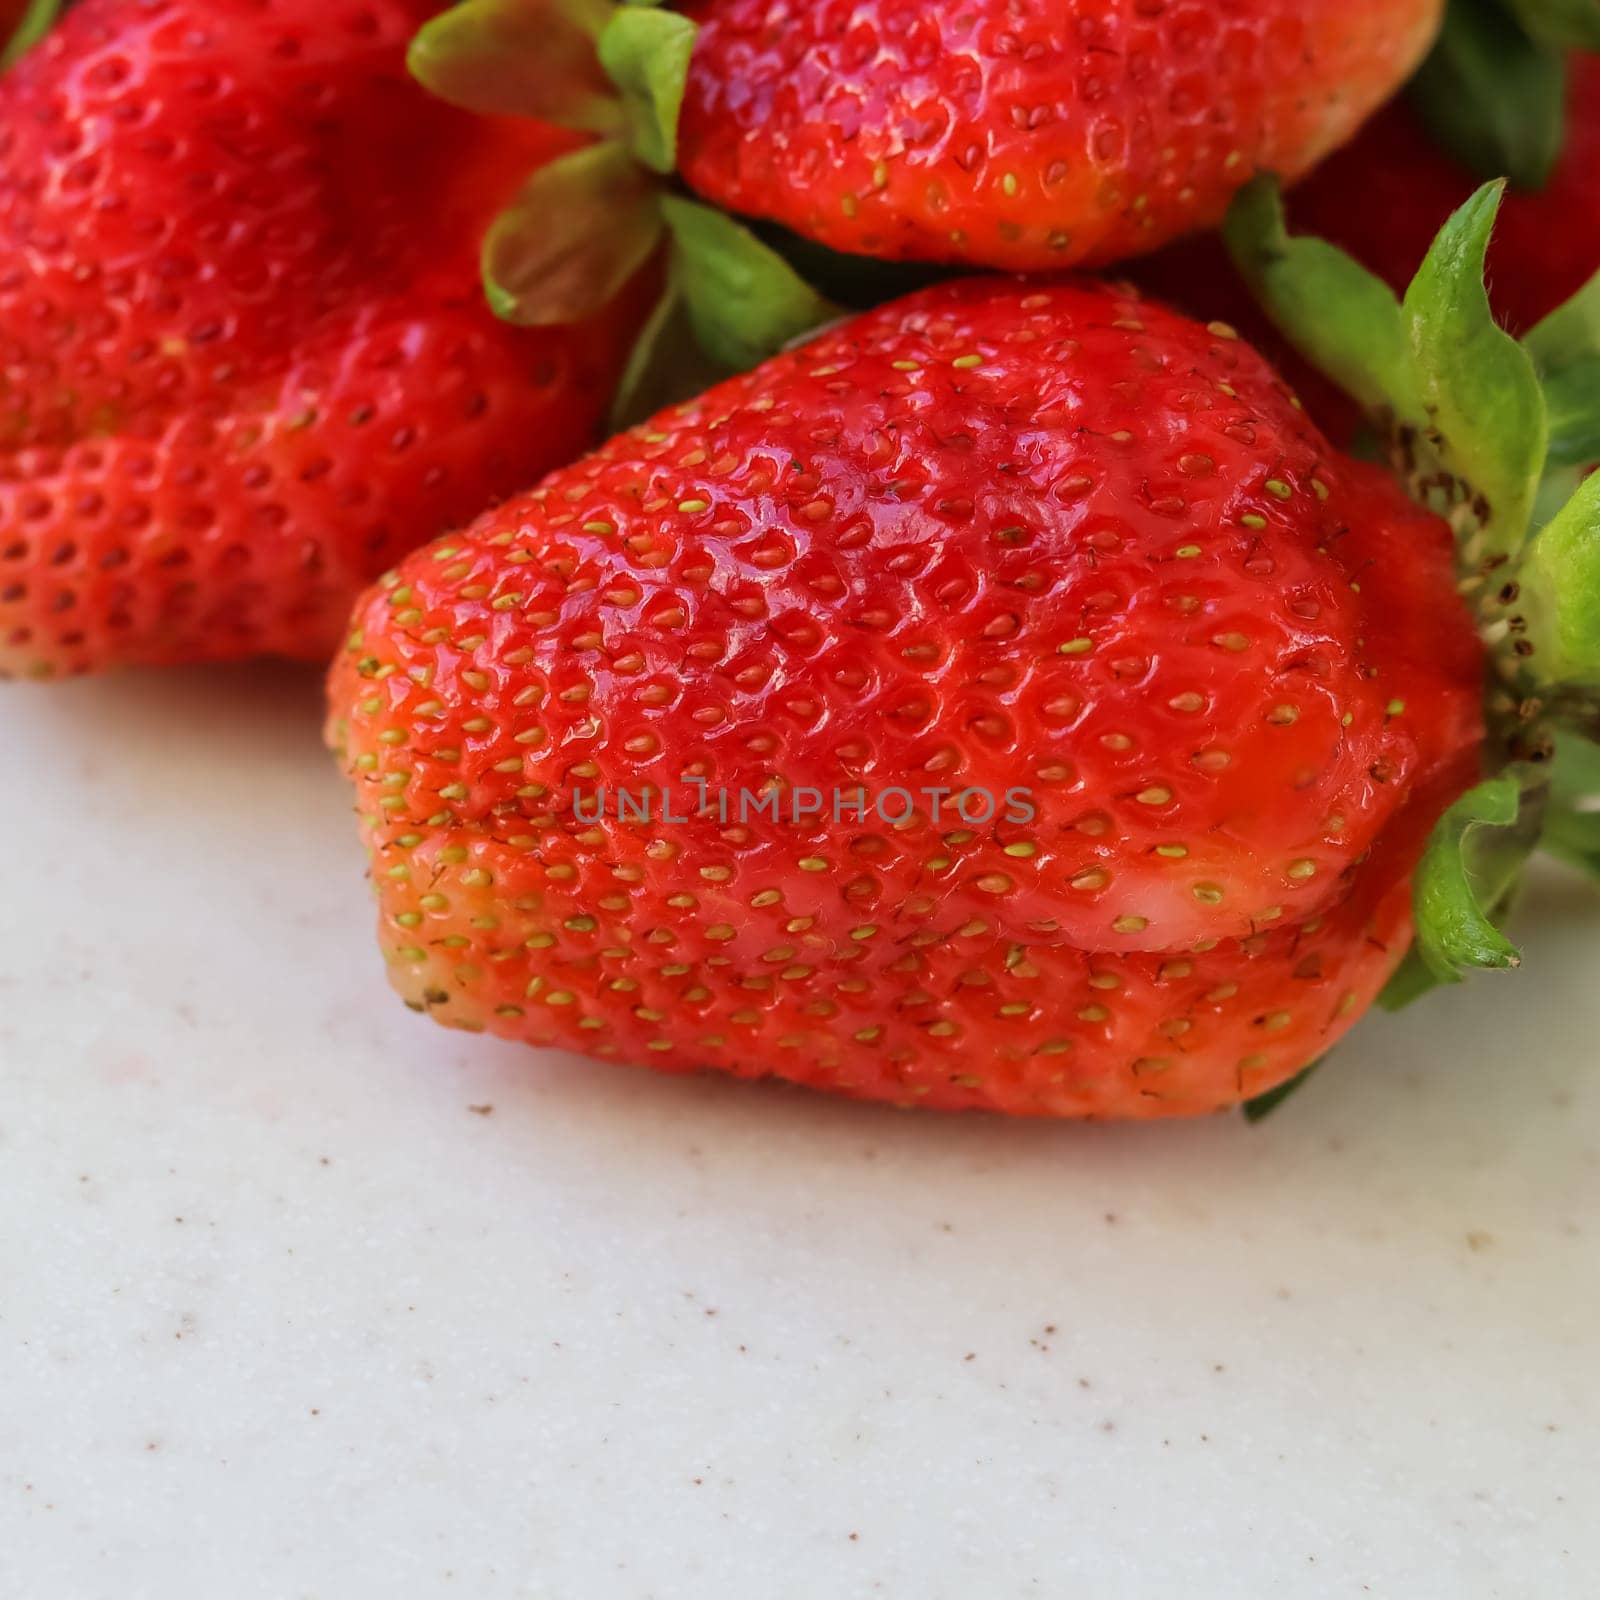 Large ripe red fresh juicy strawberries on a white background